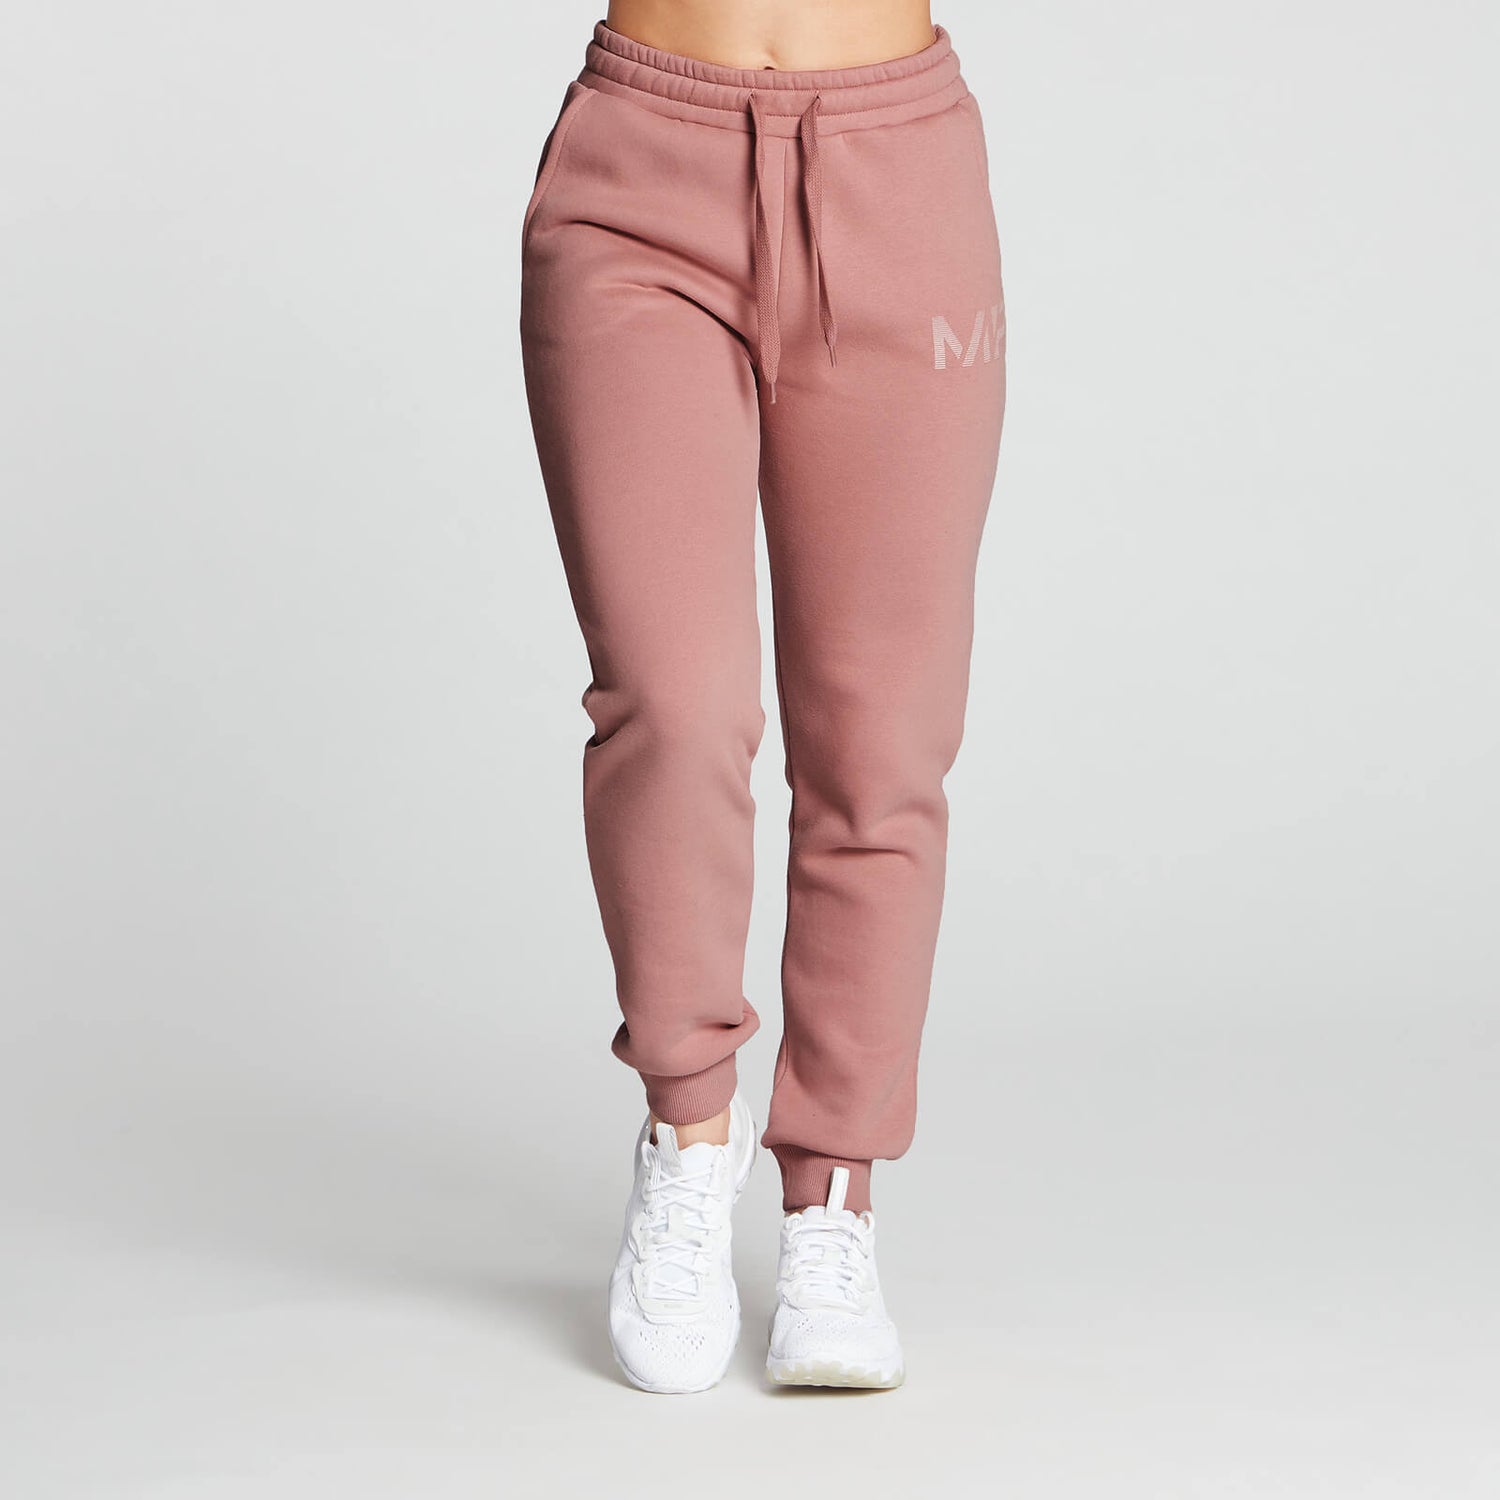 MP Women's Gradient Line Graphic Jogger - Washed Pink - XS